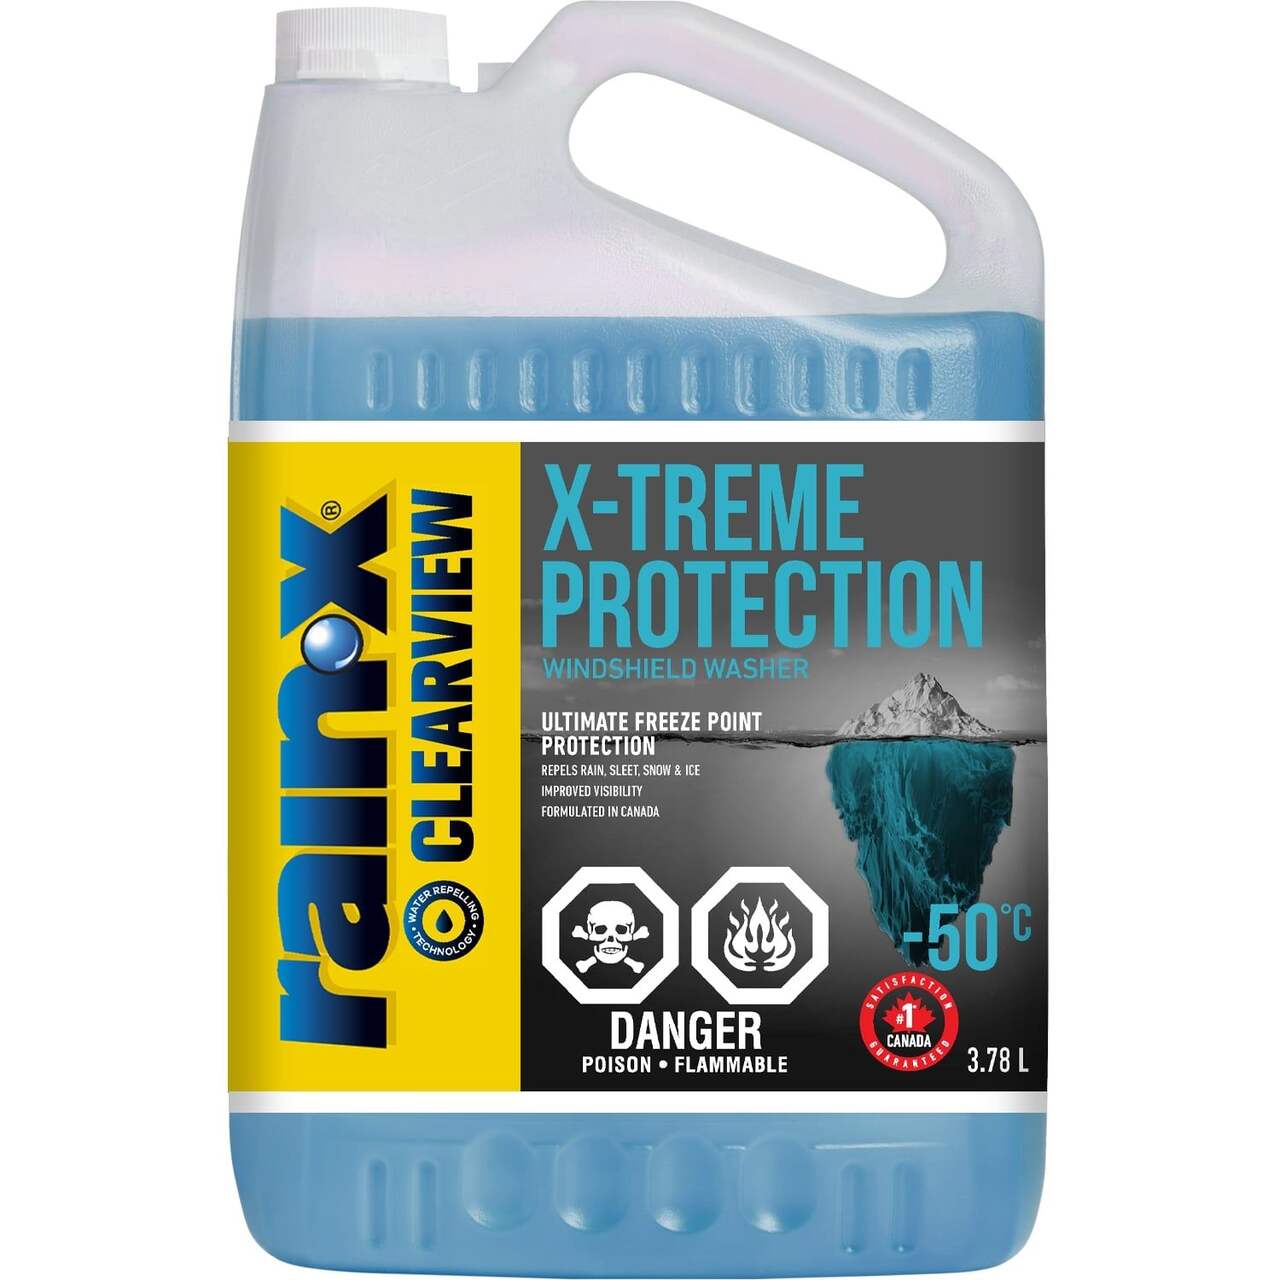 Home Garden De-Icer Windshield Washer Fluid, Greater Driving Visibility, 6  Gallon (-30° F) (PK Windshield De-Icer)